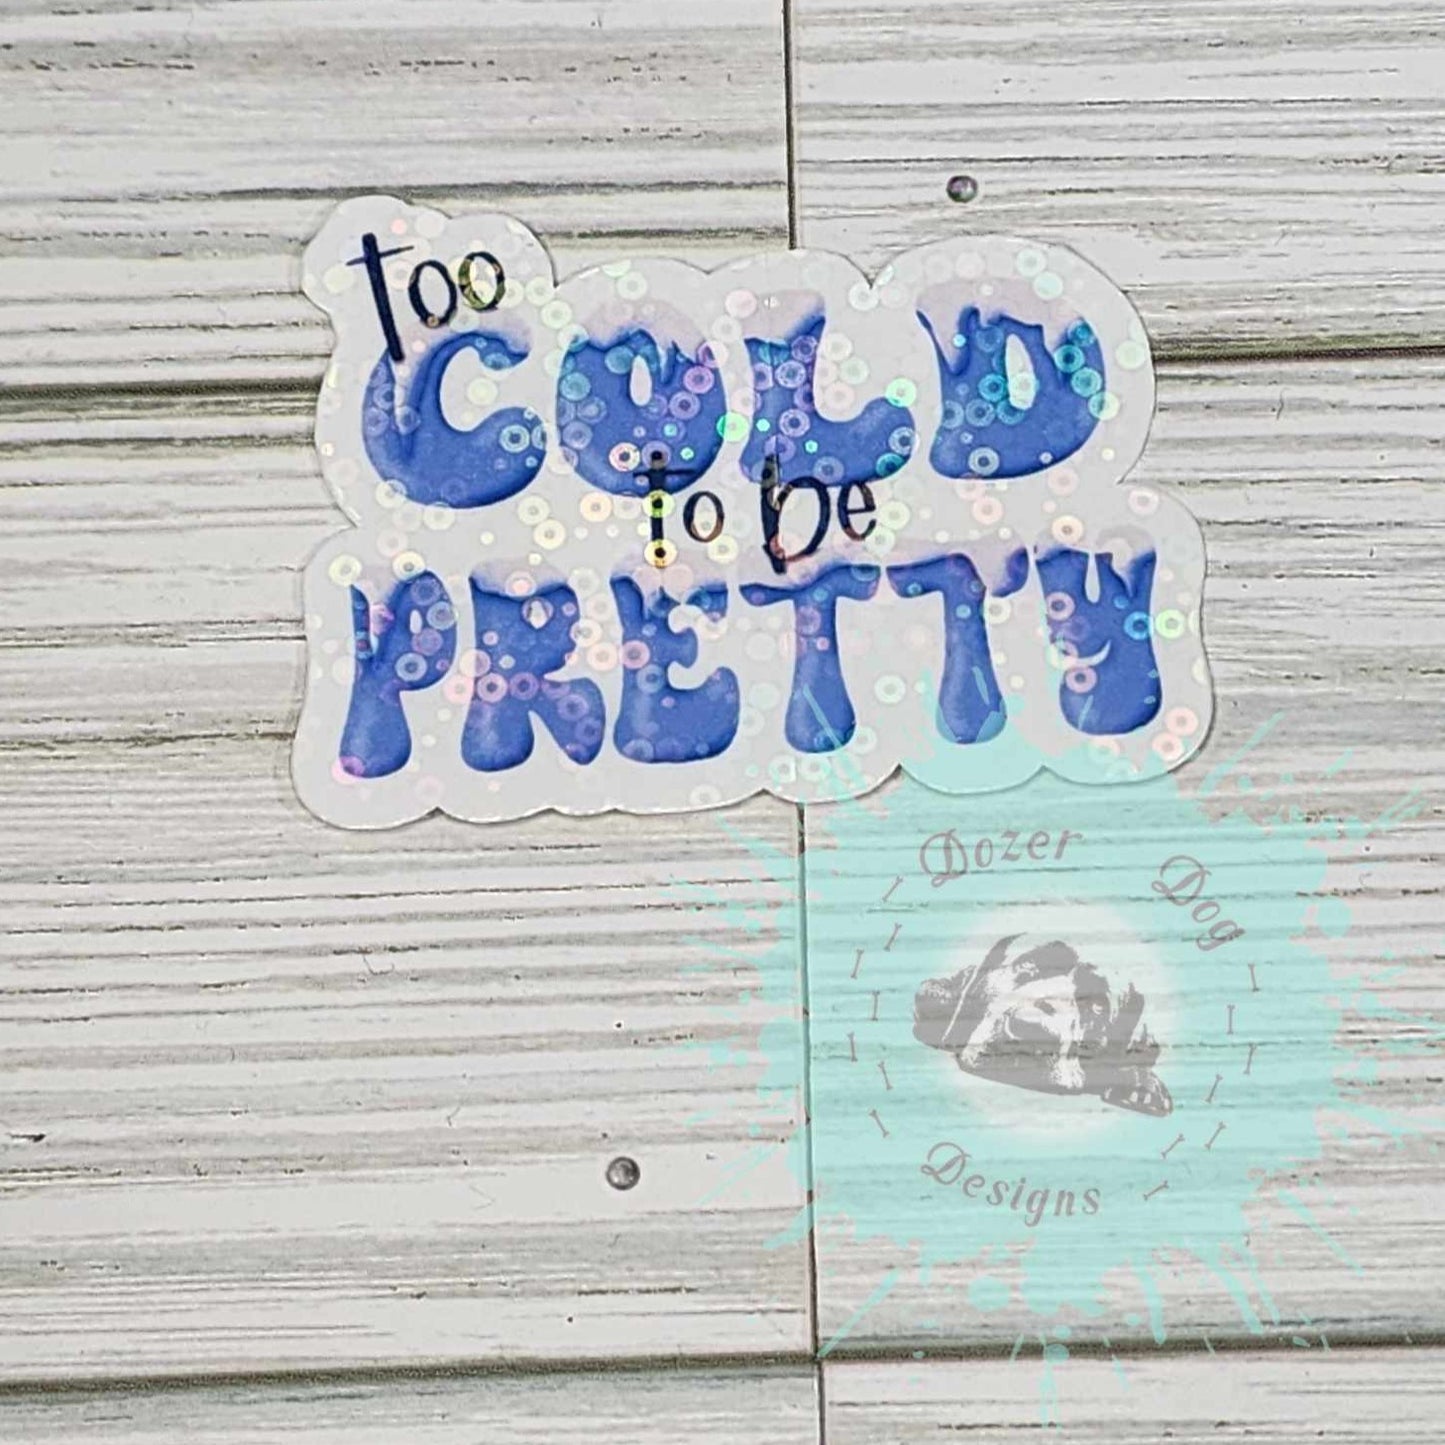 Too Cold to be Pretty Waterproof Holographic Sticker